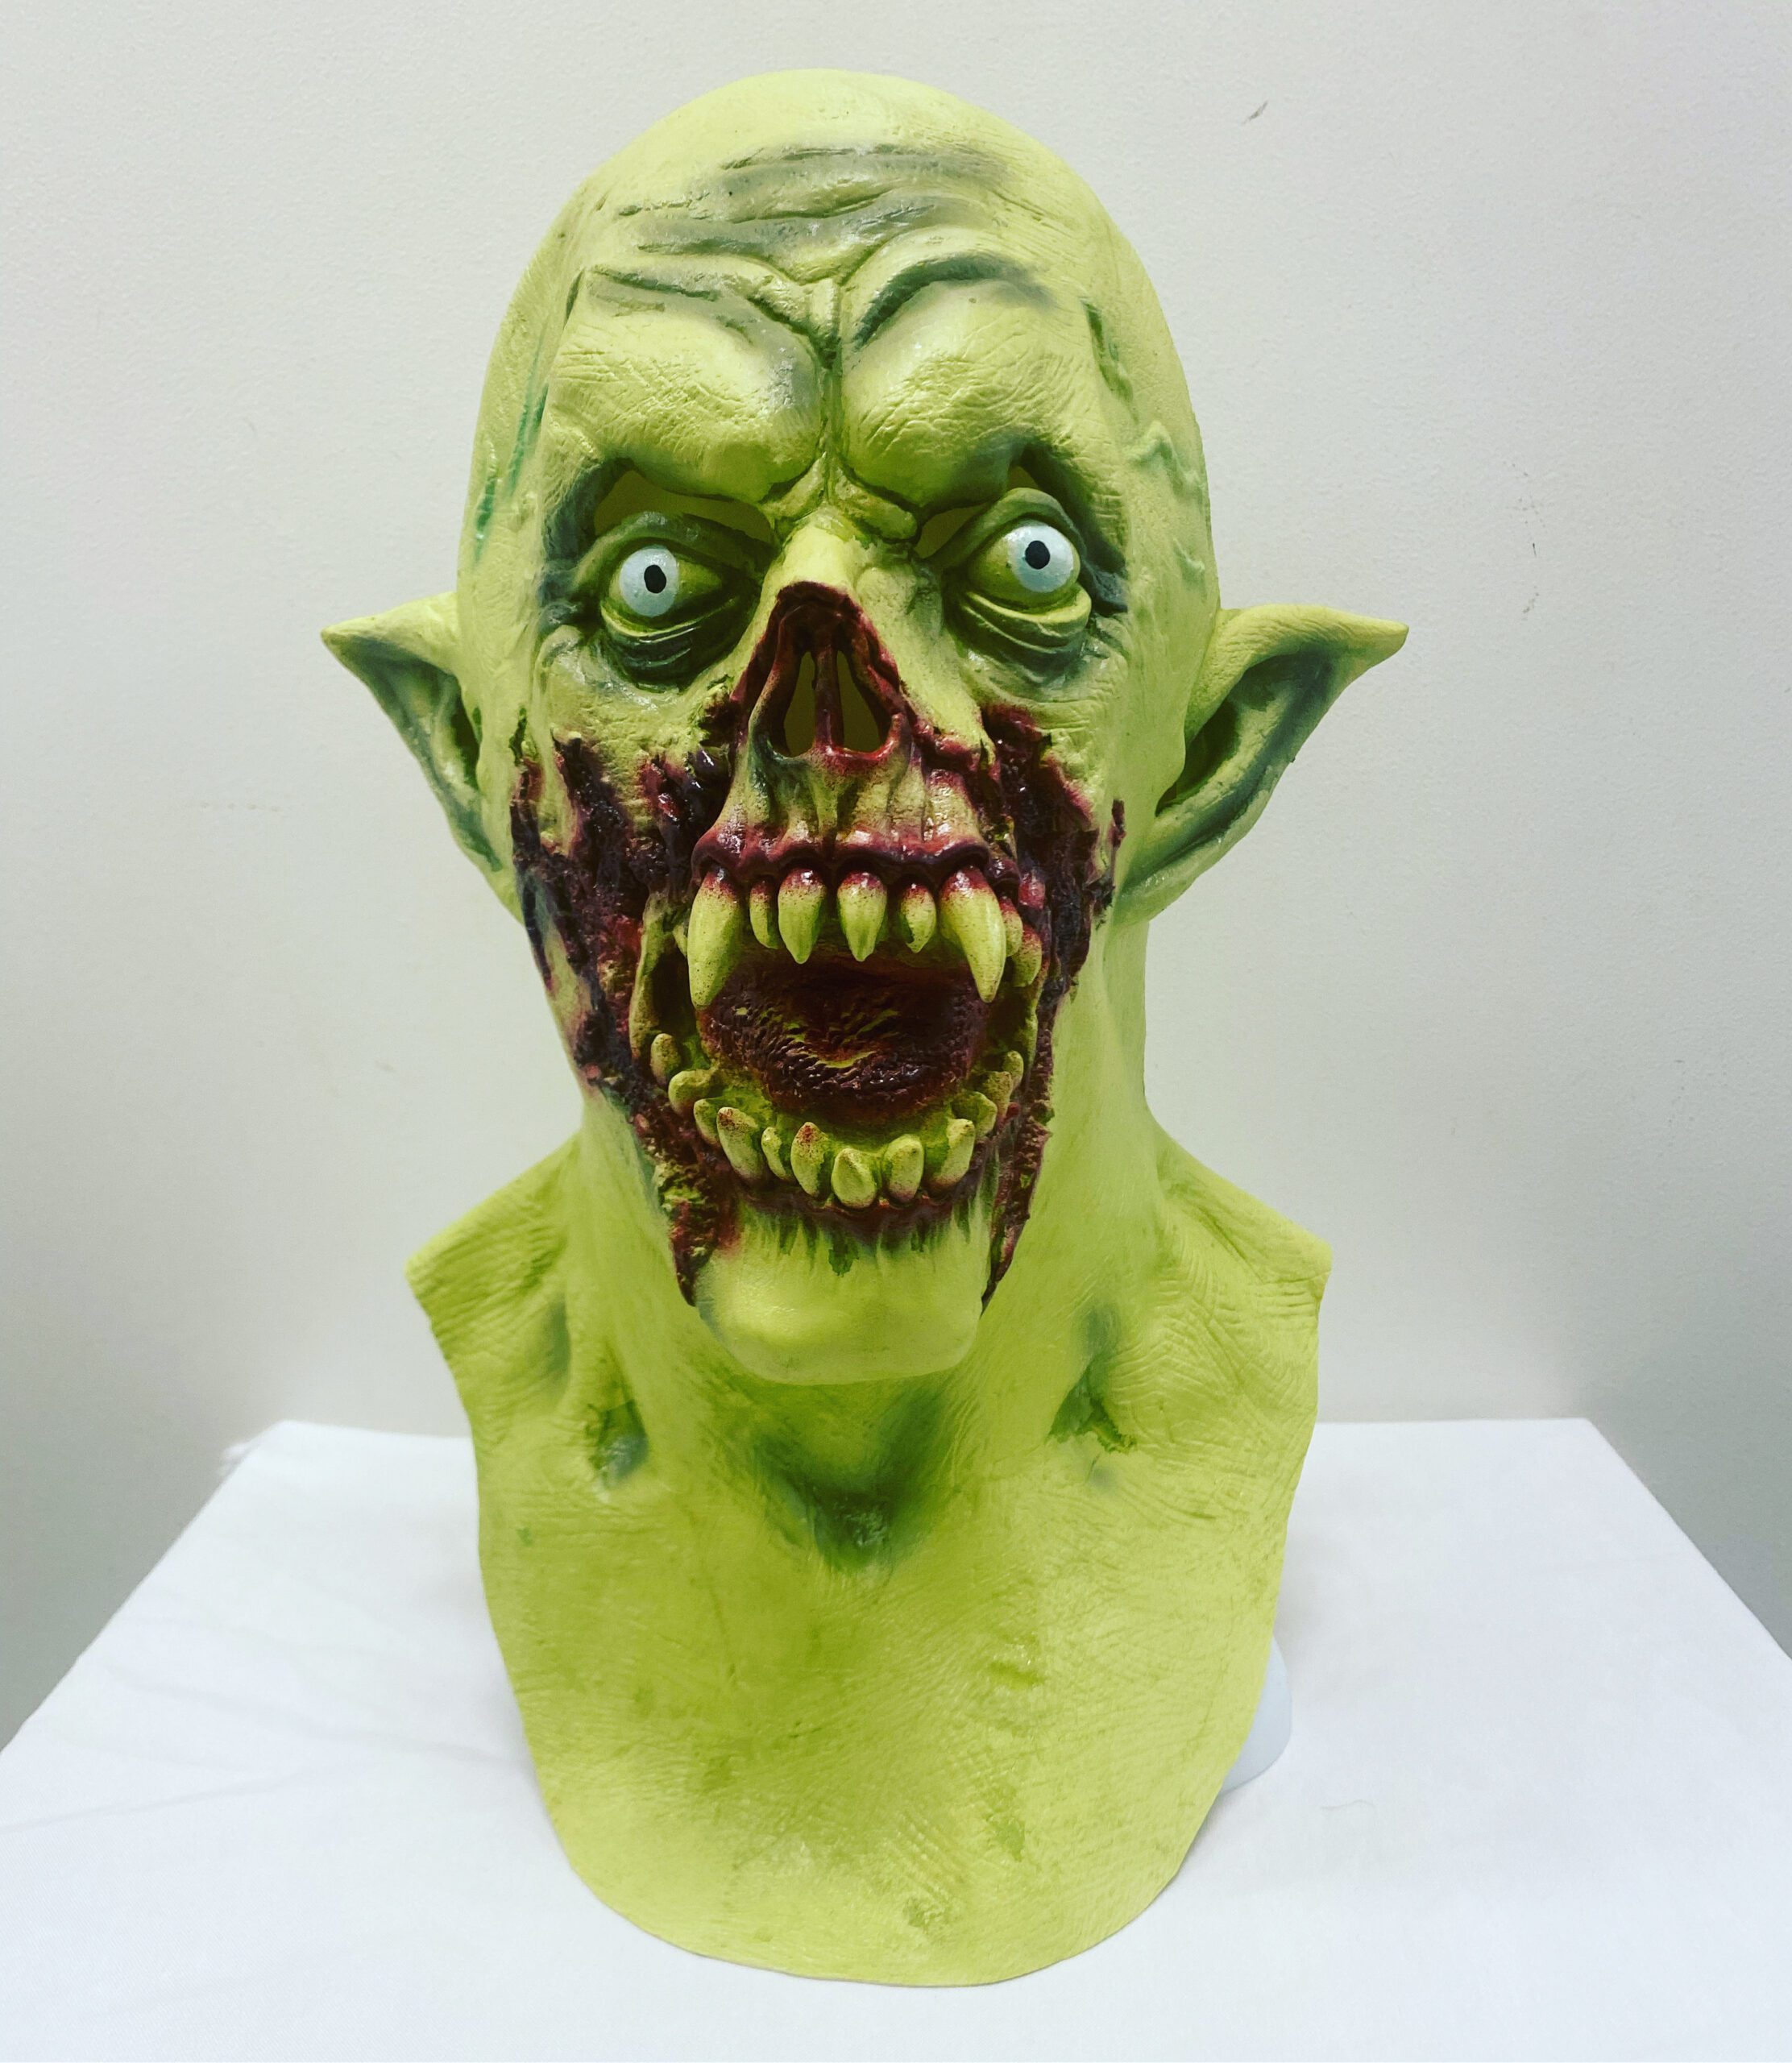 Featured image for “Goblin Zombie Mask”